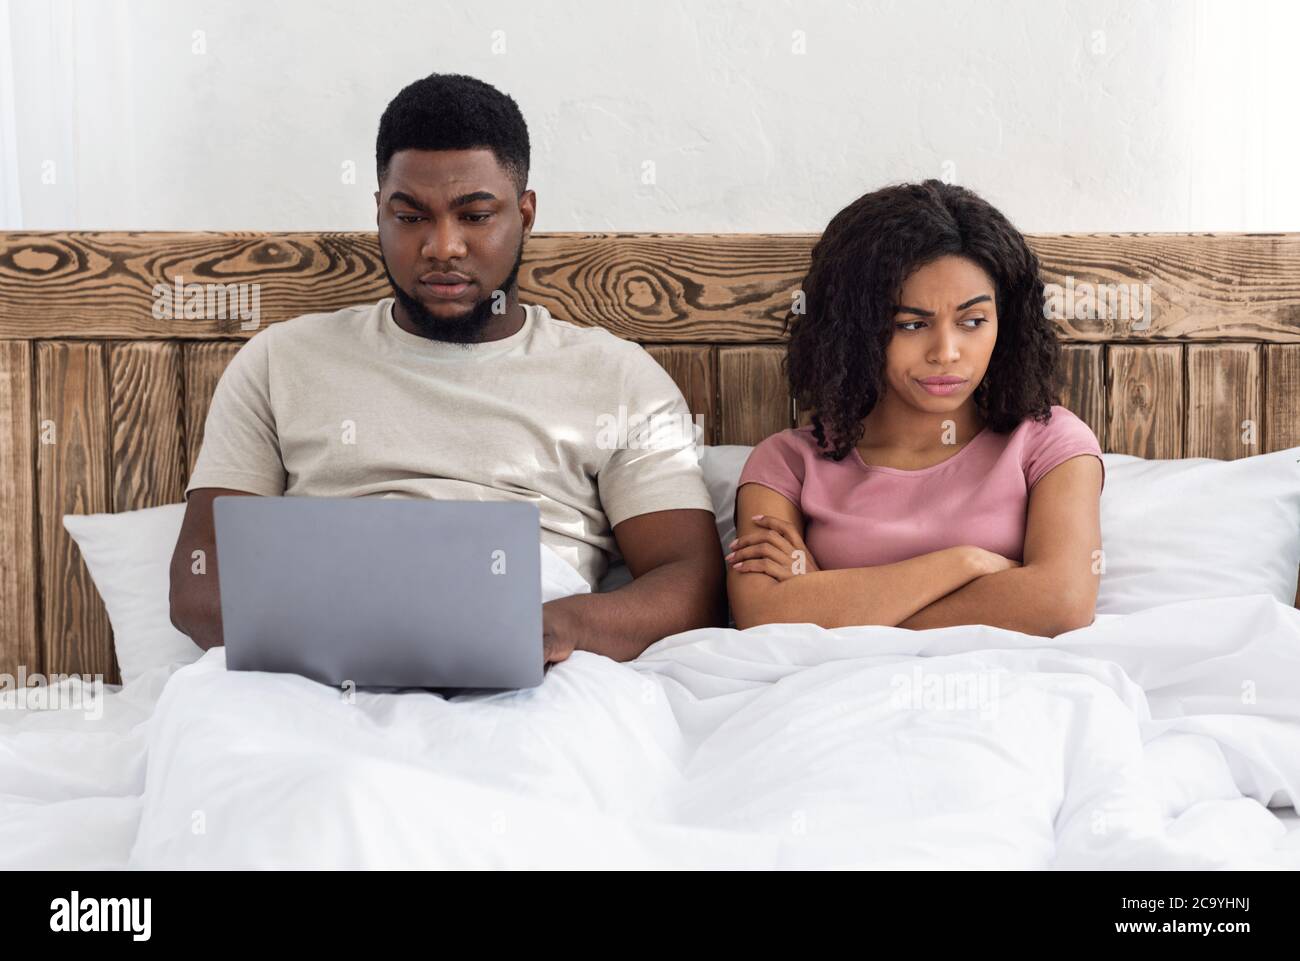 Addicted black man using laptop in bed, woman looking angry Stock Photo